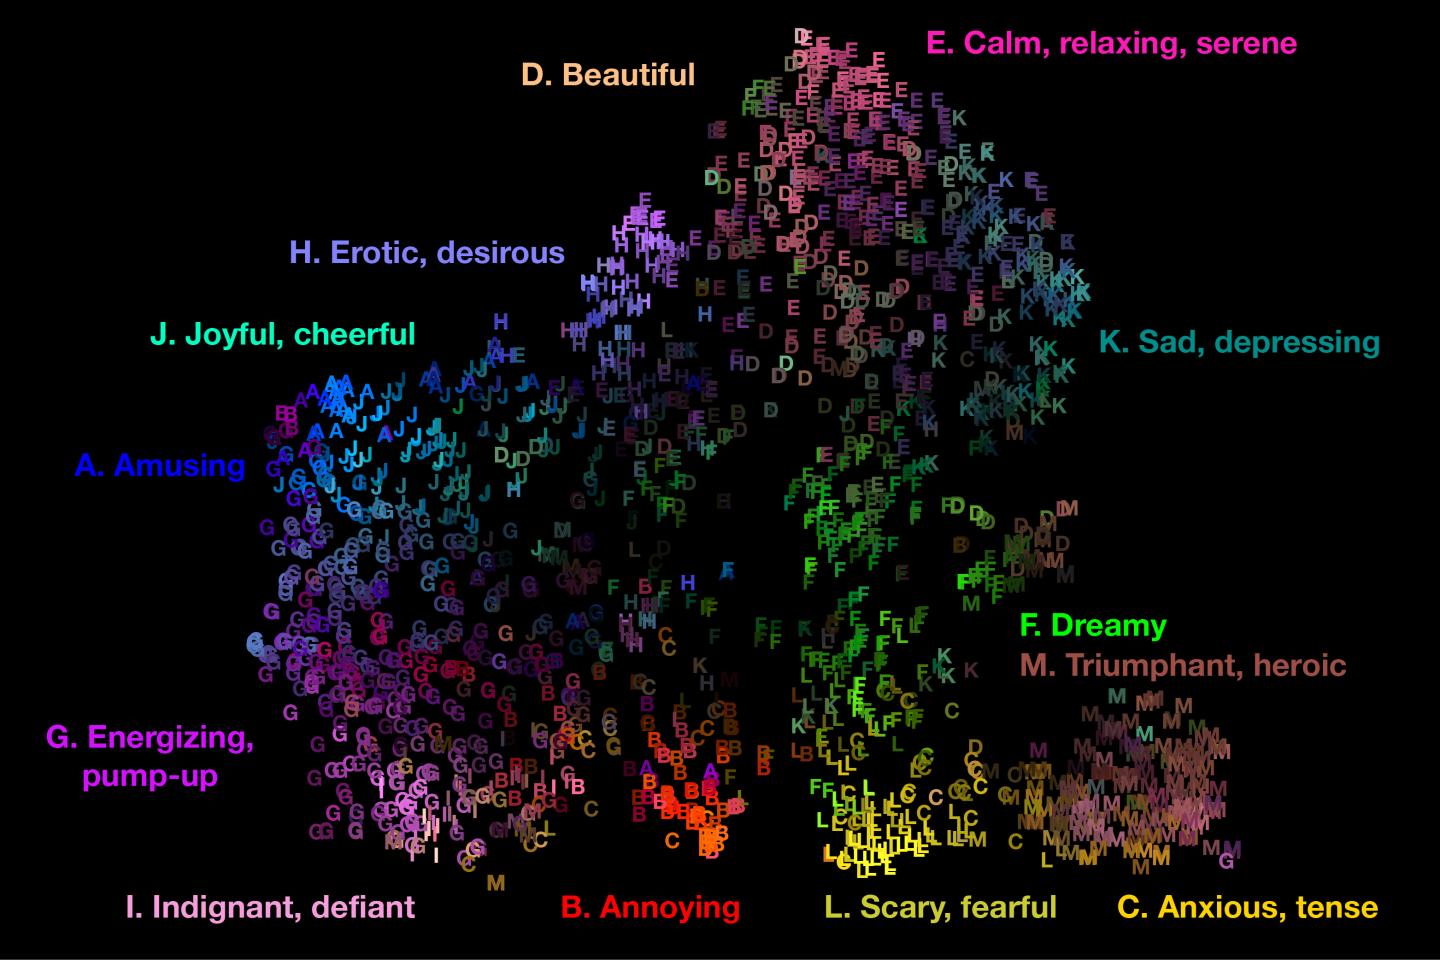 Audio Map of 13 Emotions Triggered by Music